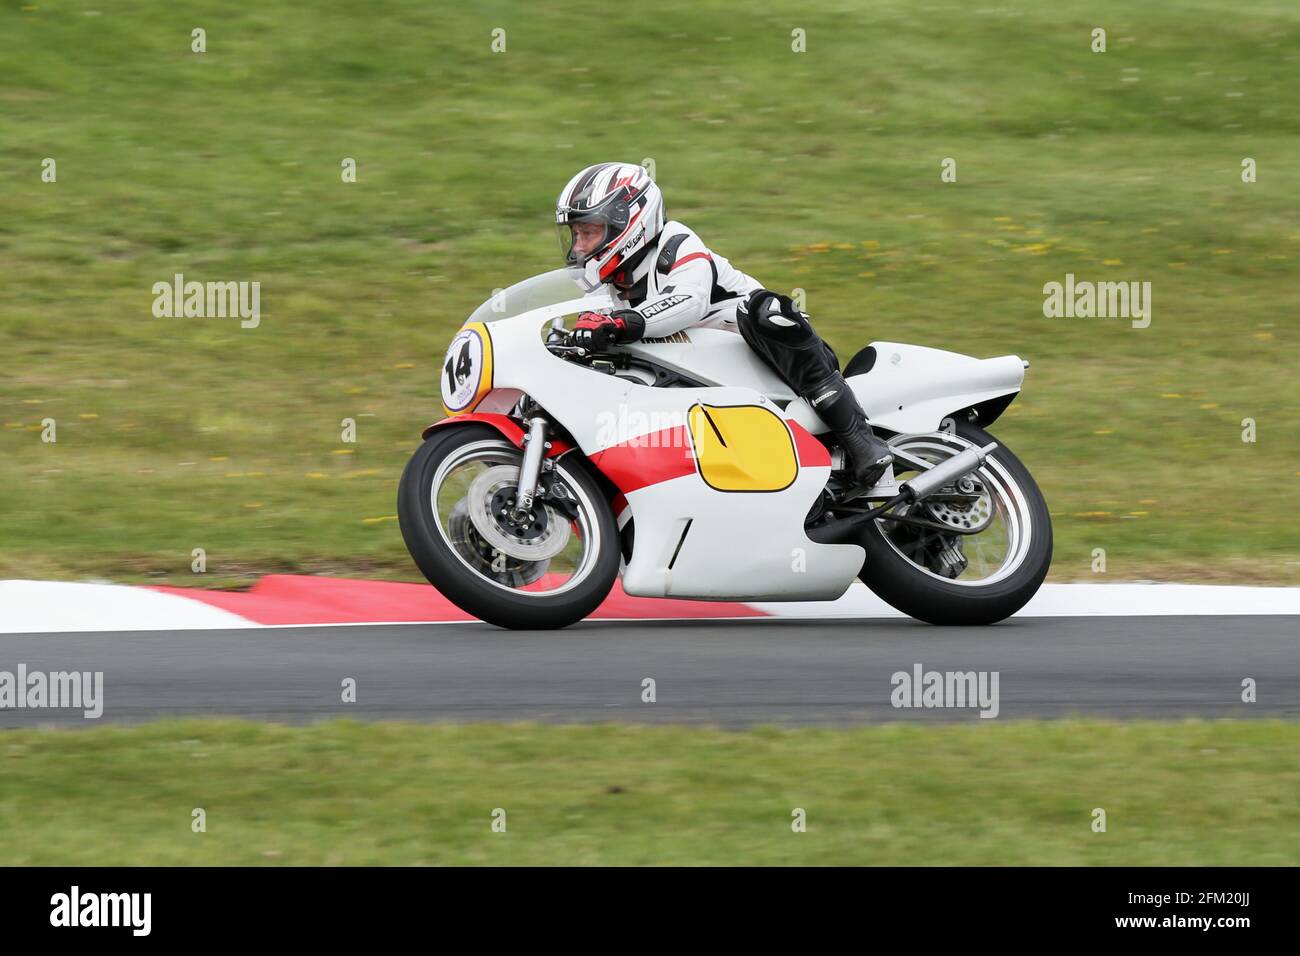 Ian Burnett approaches The Gooseneck on his Yamaha TZ500 during The Mountain Parade at the Cadwell Park International Classic in July 2015 Stock Photo